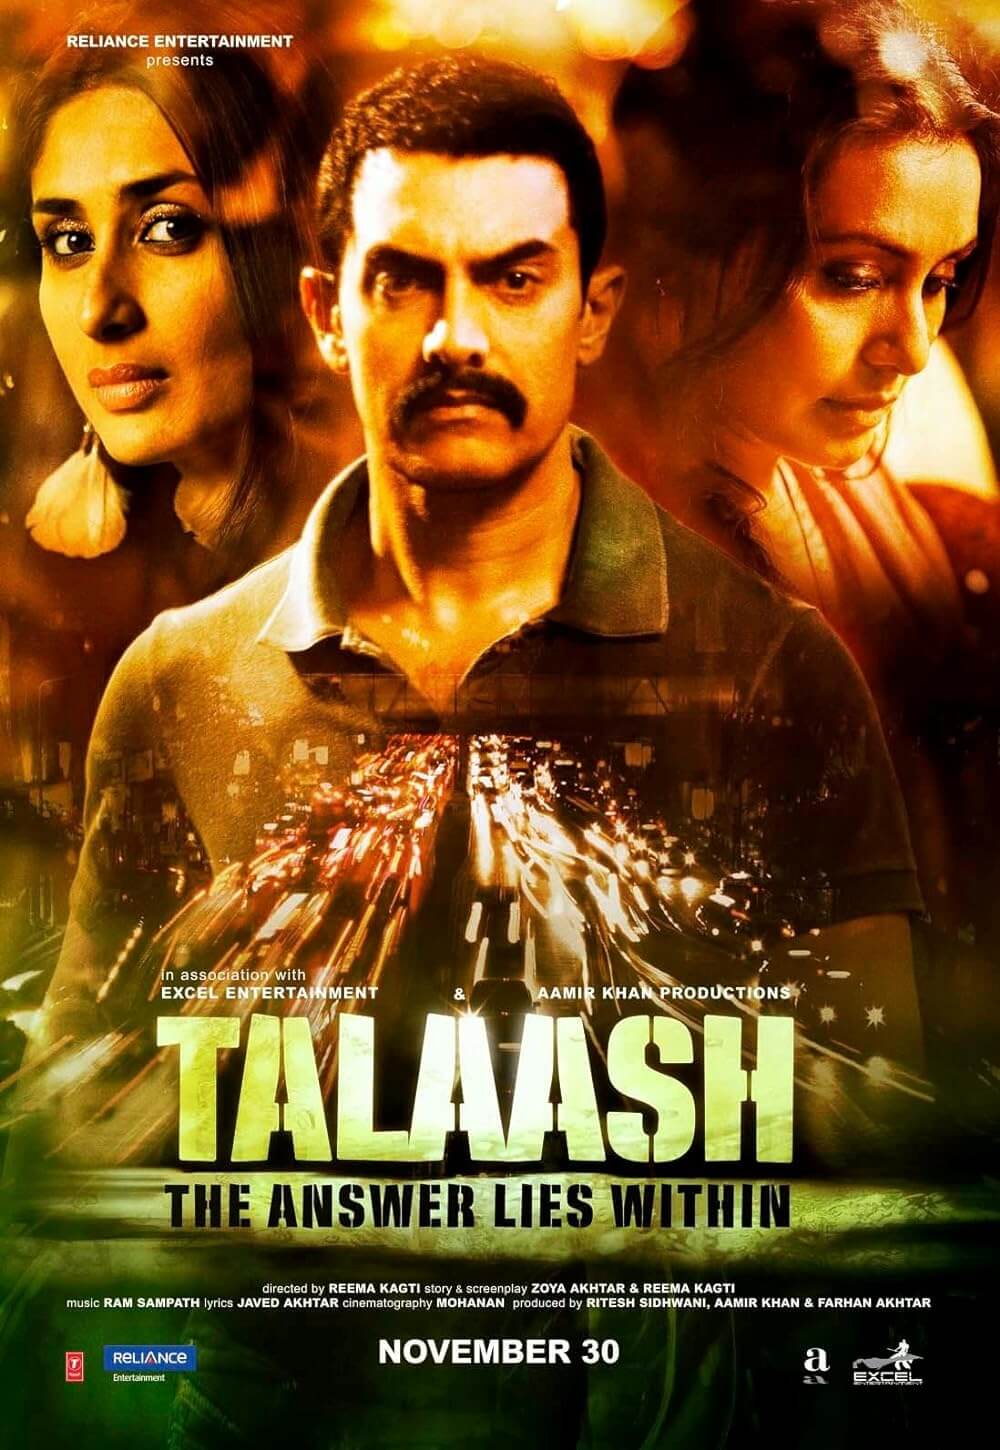 Talaash The Answer Lies Within Movie Poster